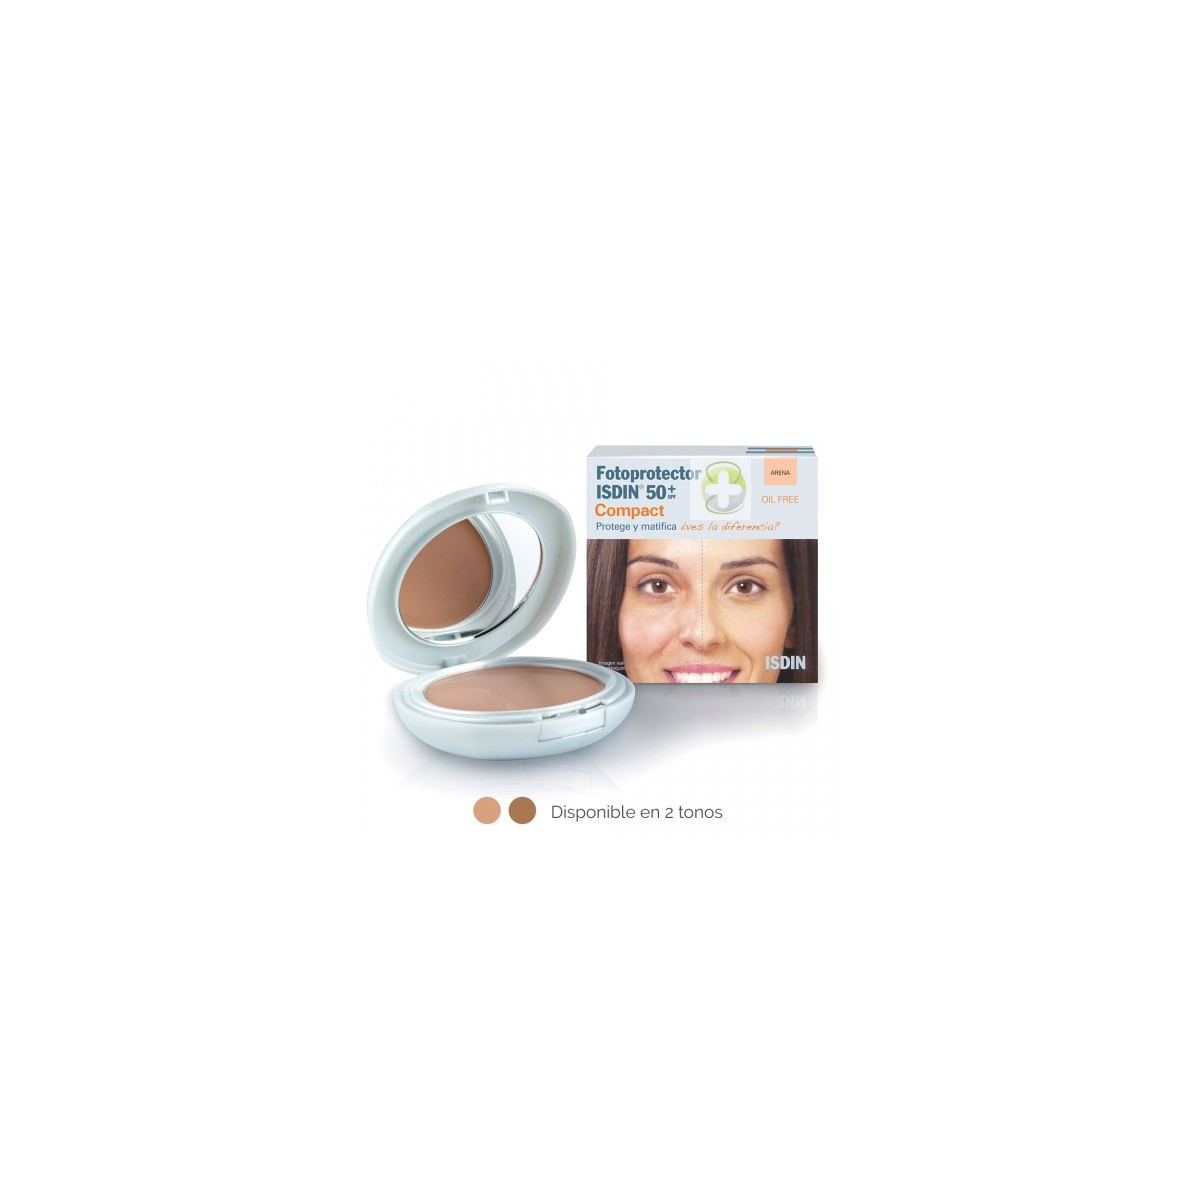 ISDIN FOTOPROTECTOR COMPACT SPF50+ OIL FREE ARENA